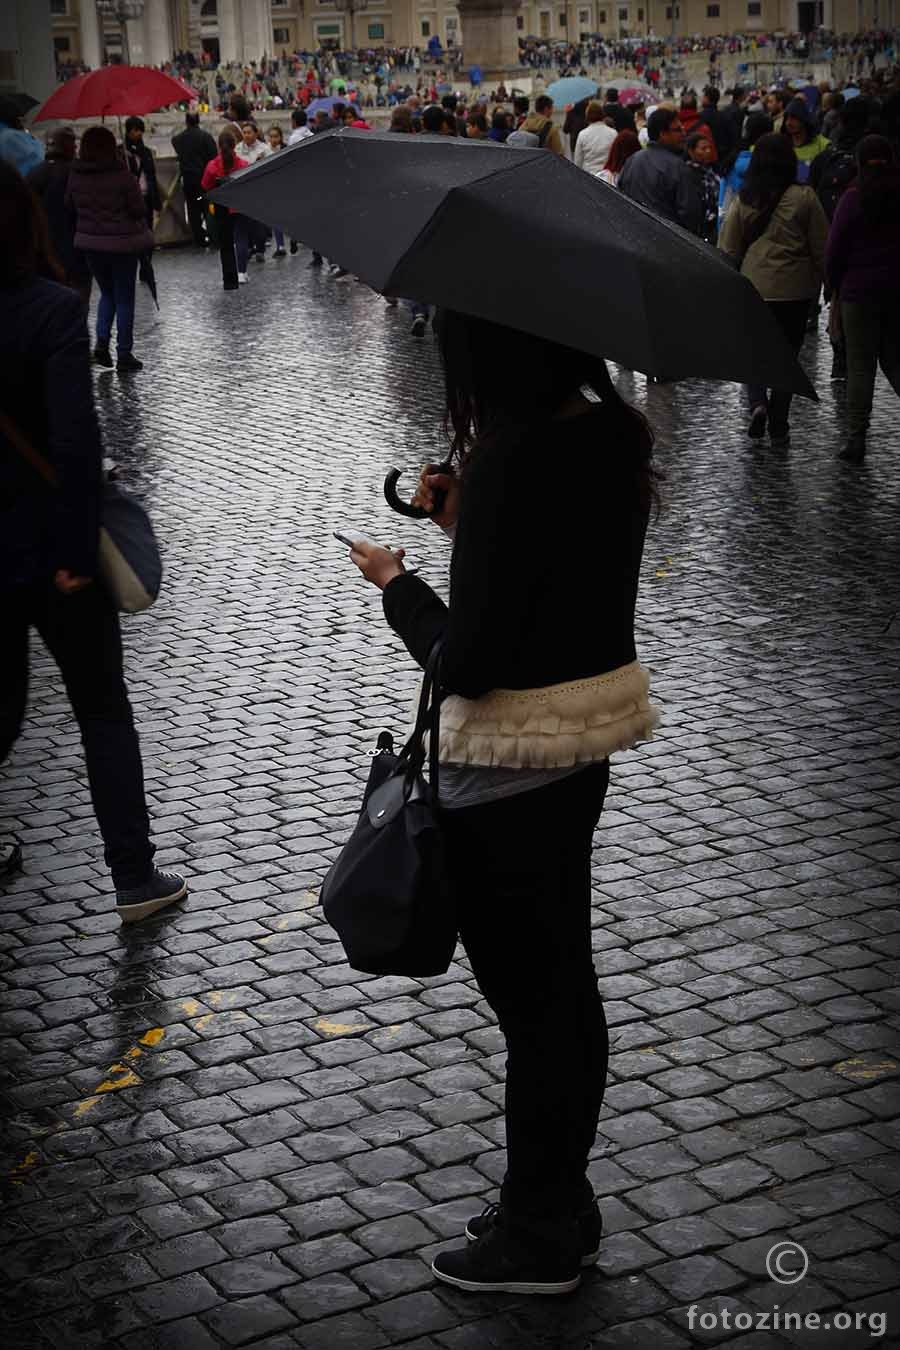 A girl in black on a rainy day